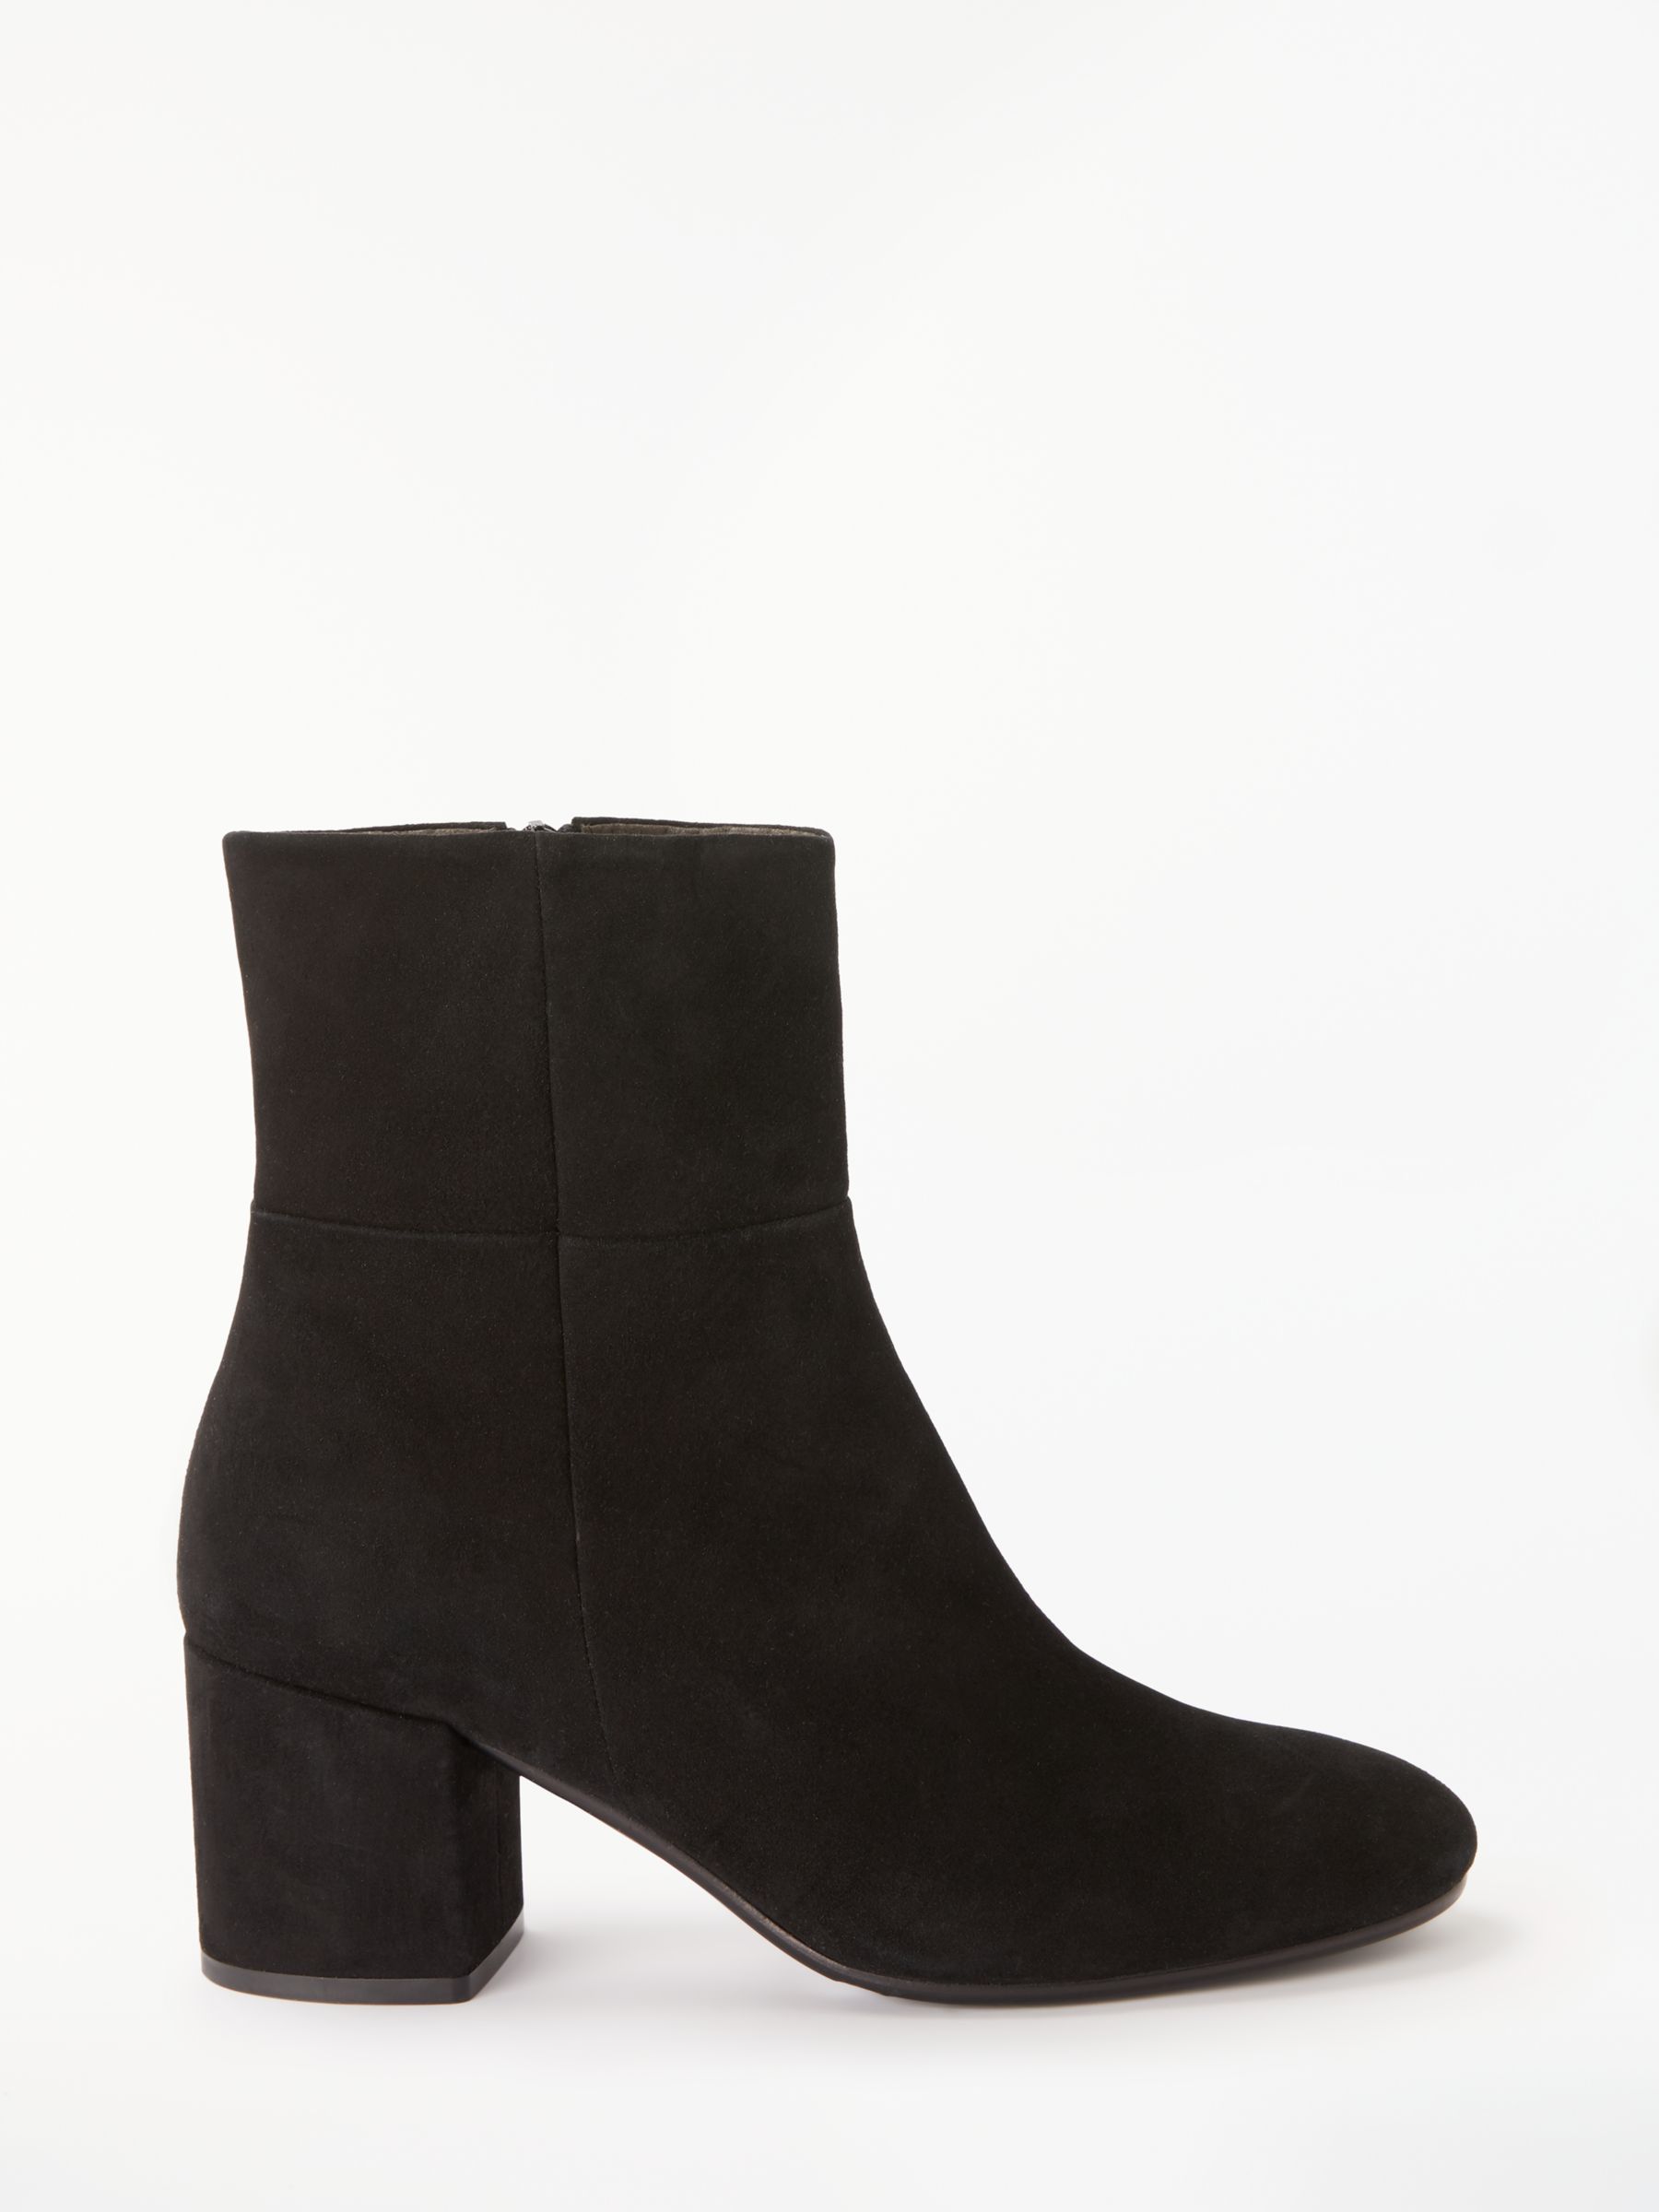 John Lewis & Partners Odessa High Cut Ankle Boots, Black Suede at John ...